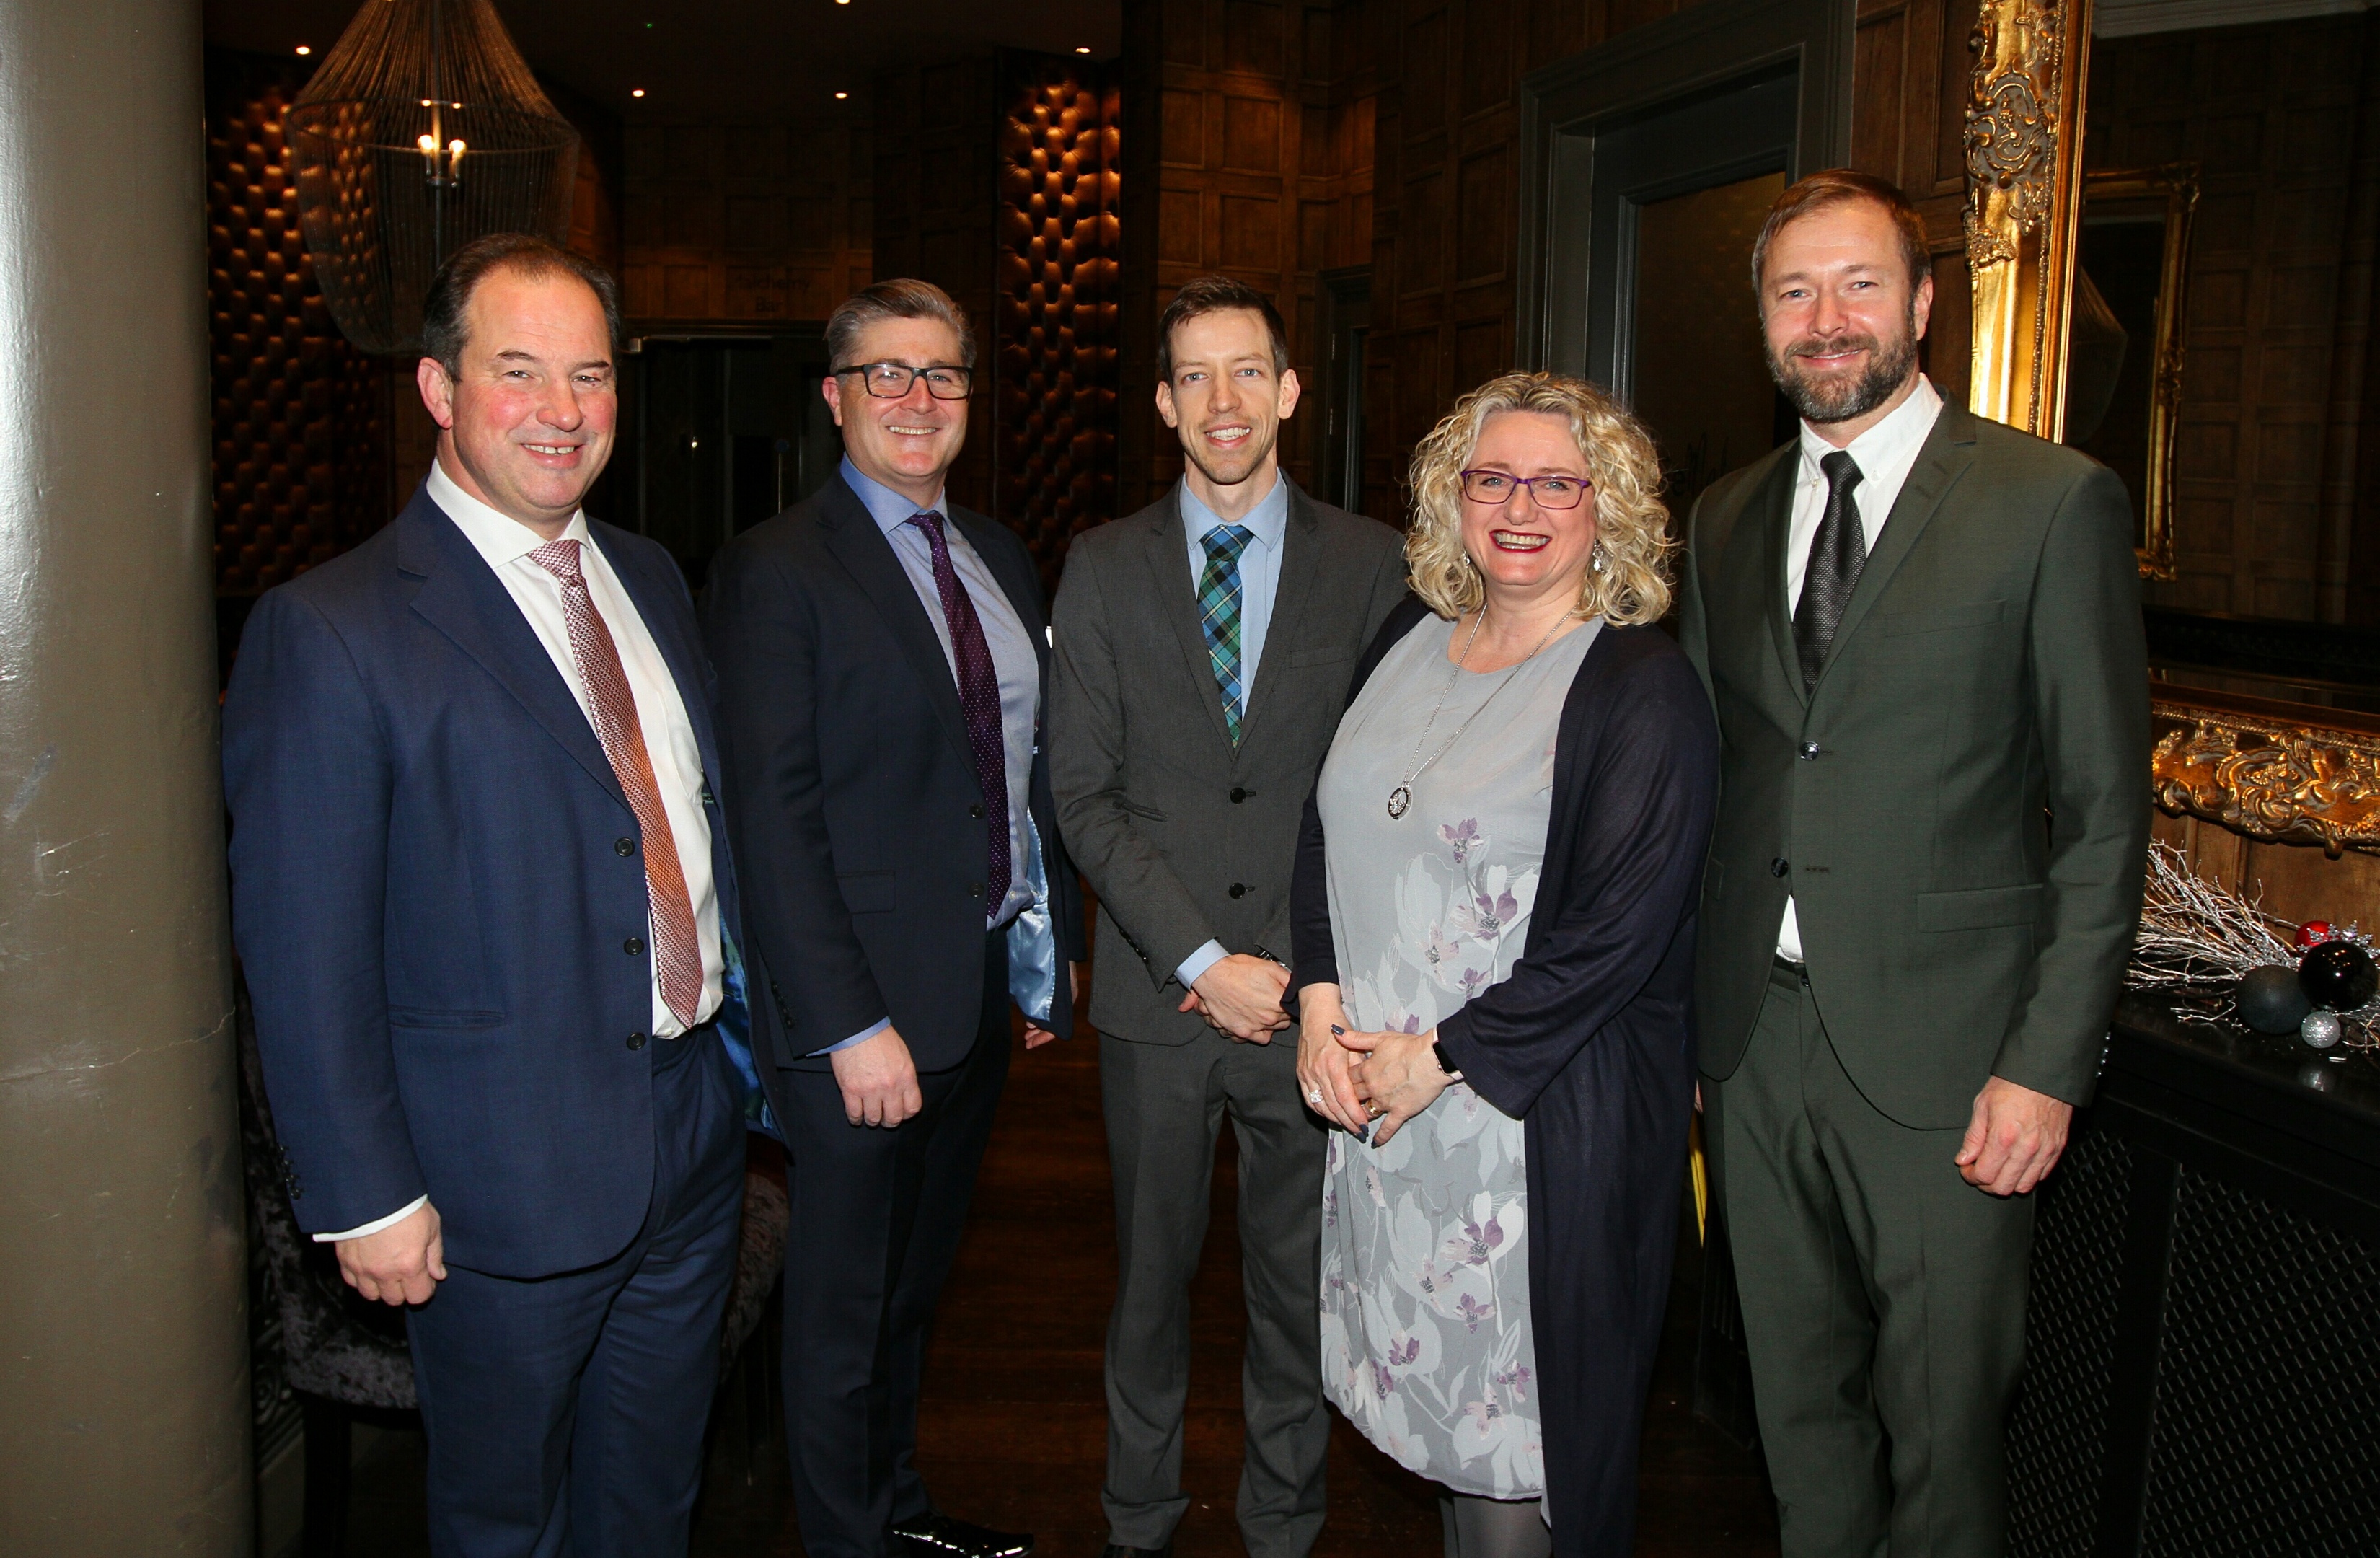 Pictured are the main speakers, Tim Allan (president Scottish Chambers), Colin Loveday (Chamber president), John Alexander (Dundee Council leader), Alison Henderson, Chamber chief executive, and Fredrik Haggblom (CEO at Agenda Retail).